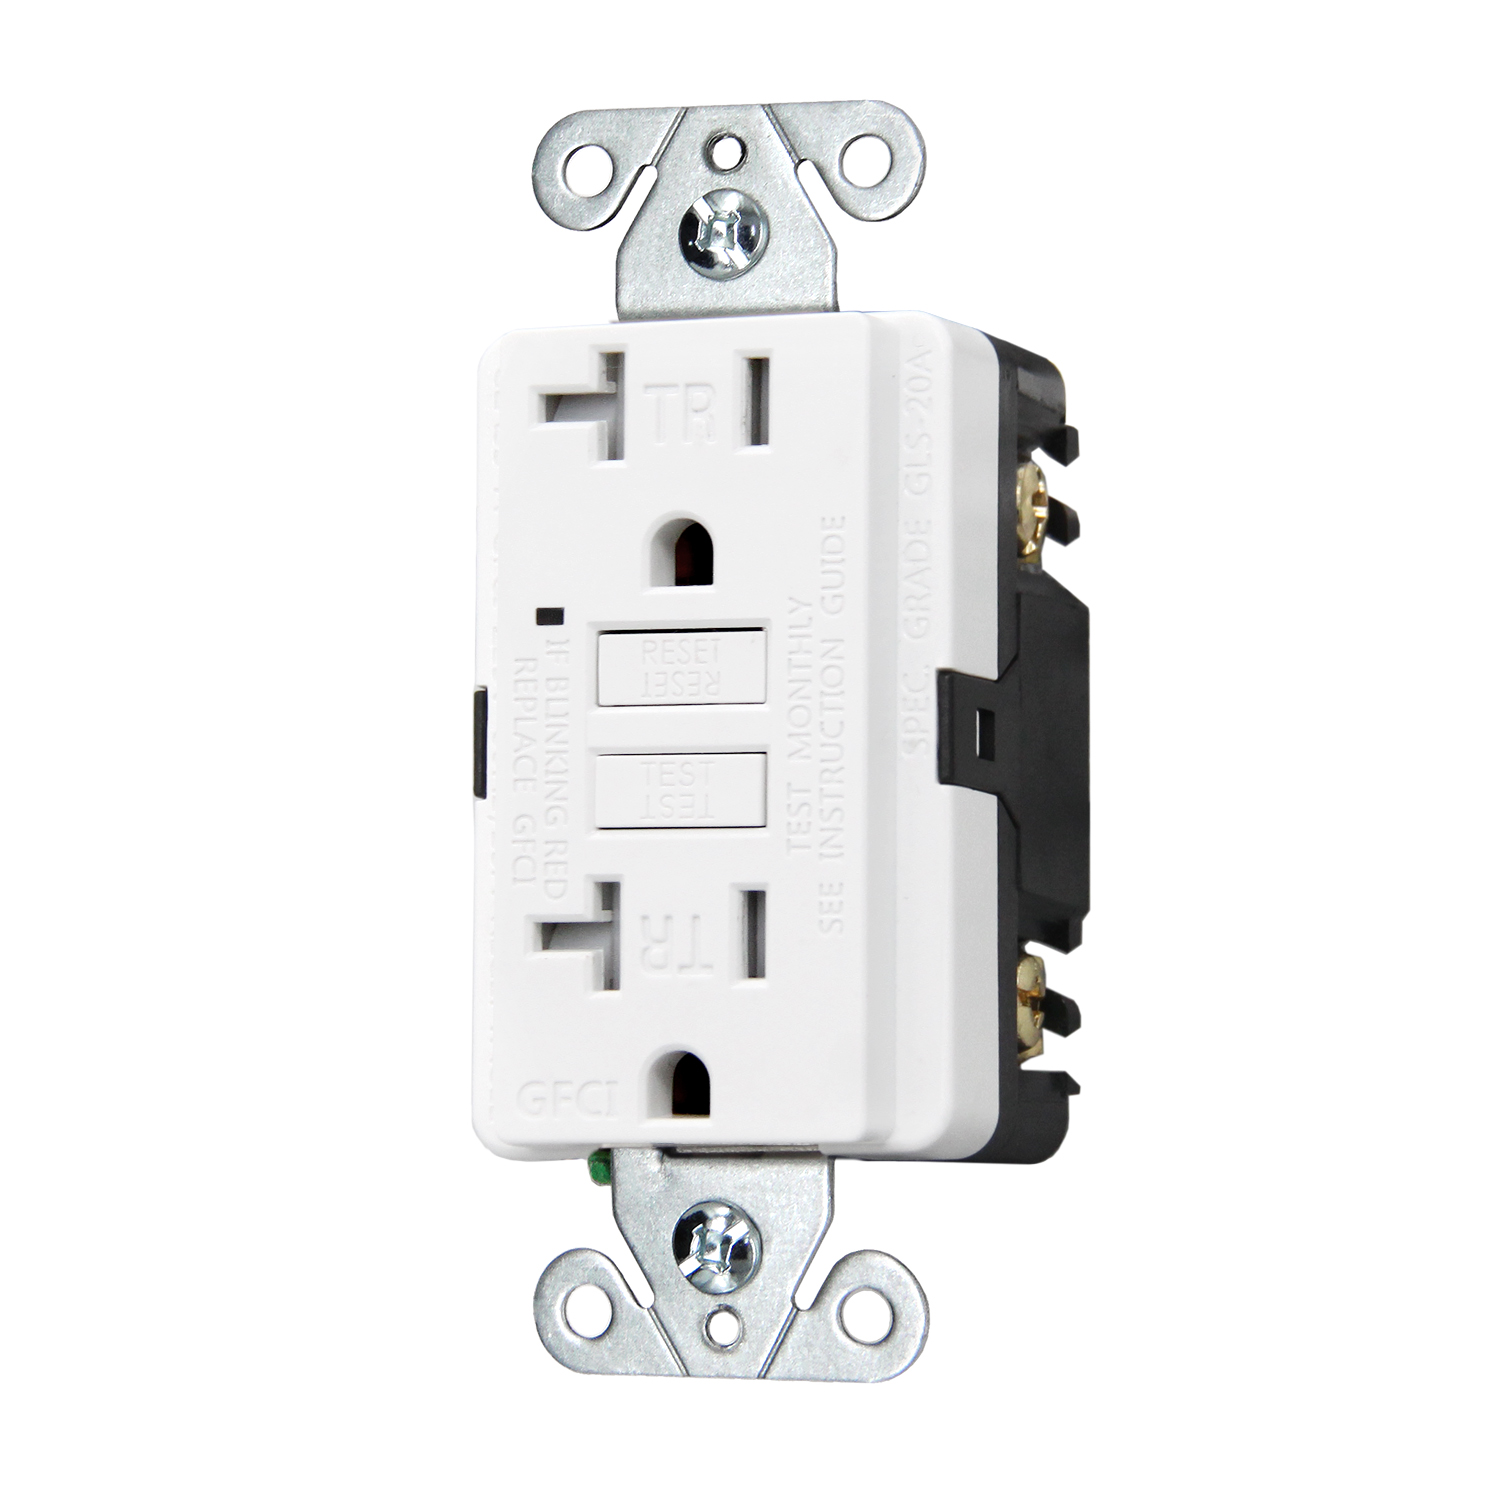 Faith UL Listed America 15A Electrical High Quality Duplex GFCI Tamper Resistant Receptacles